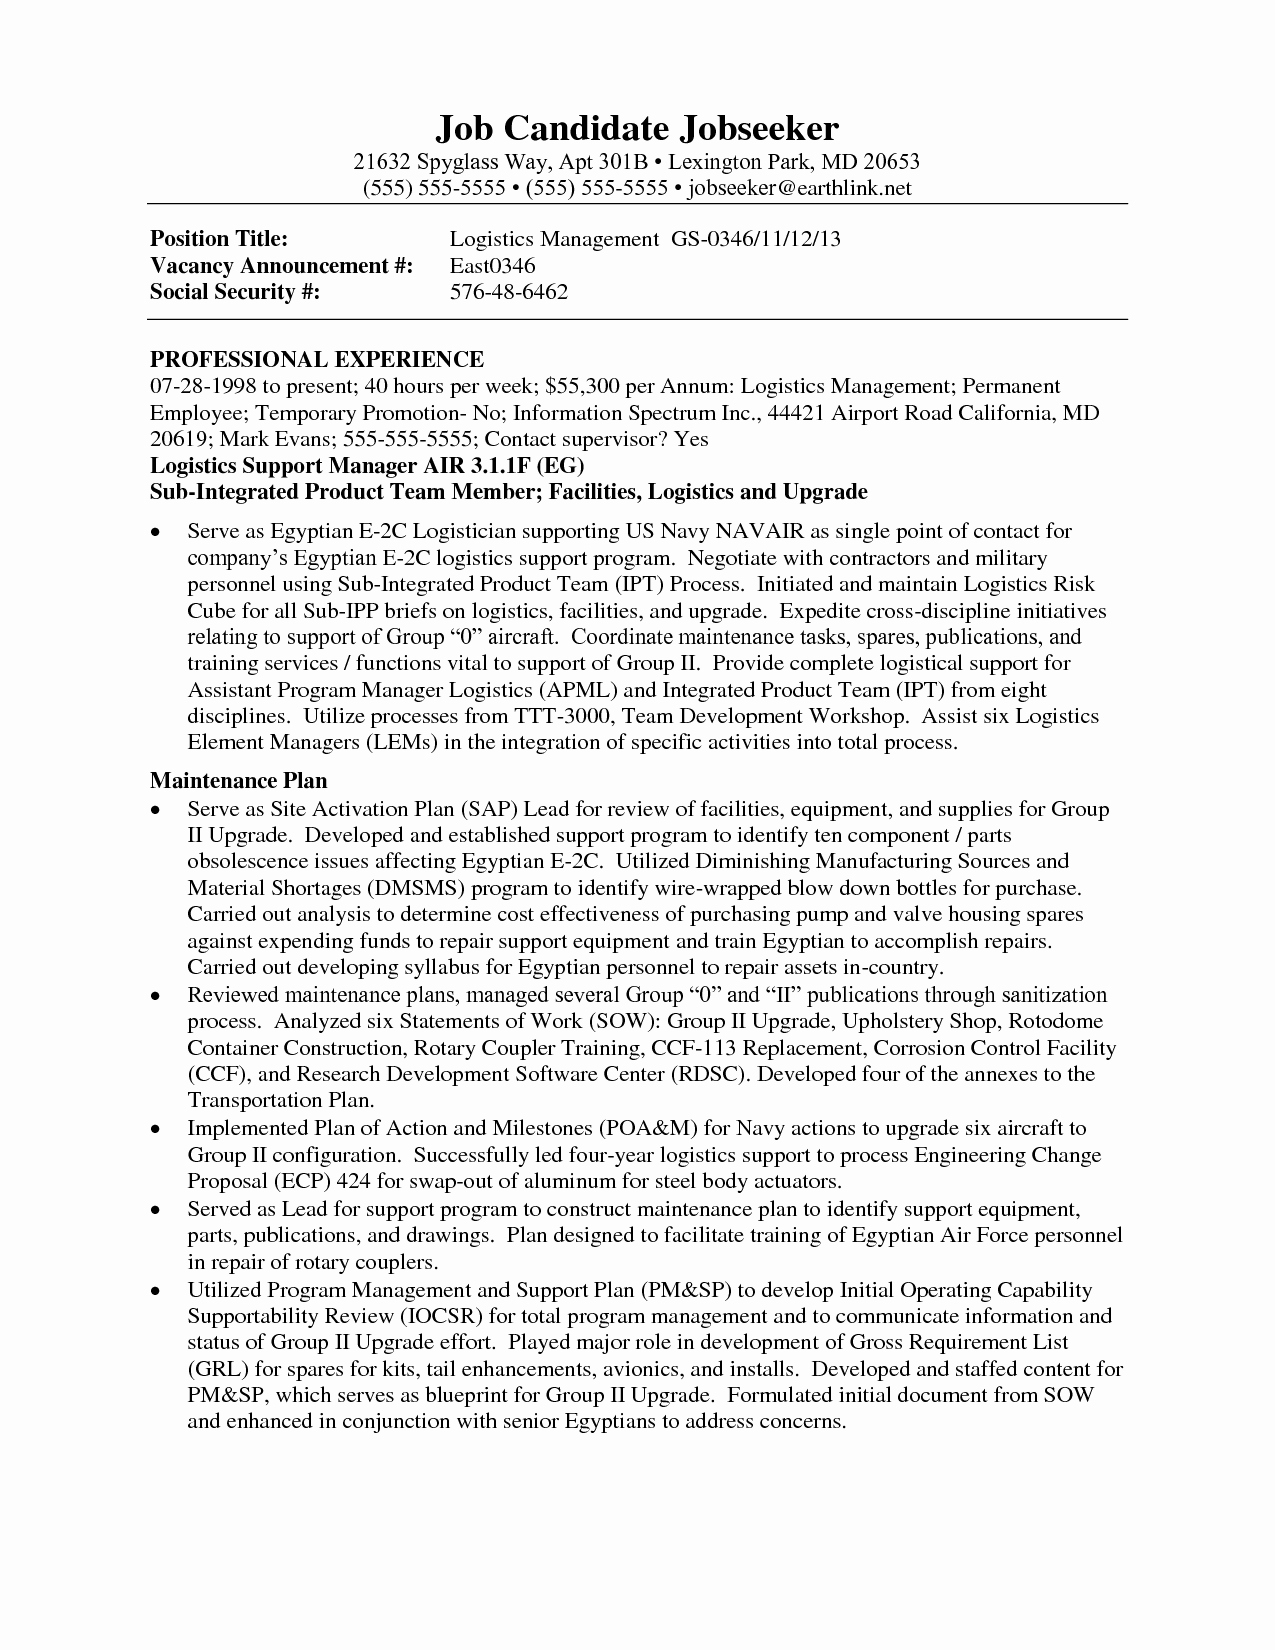 Operations Manager Cover Letter Template - 20 Operations Manager Cover Letter Sample